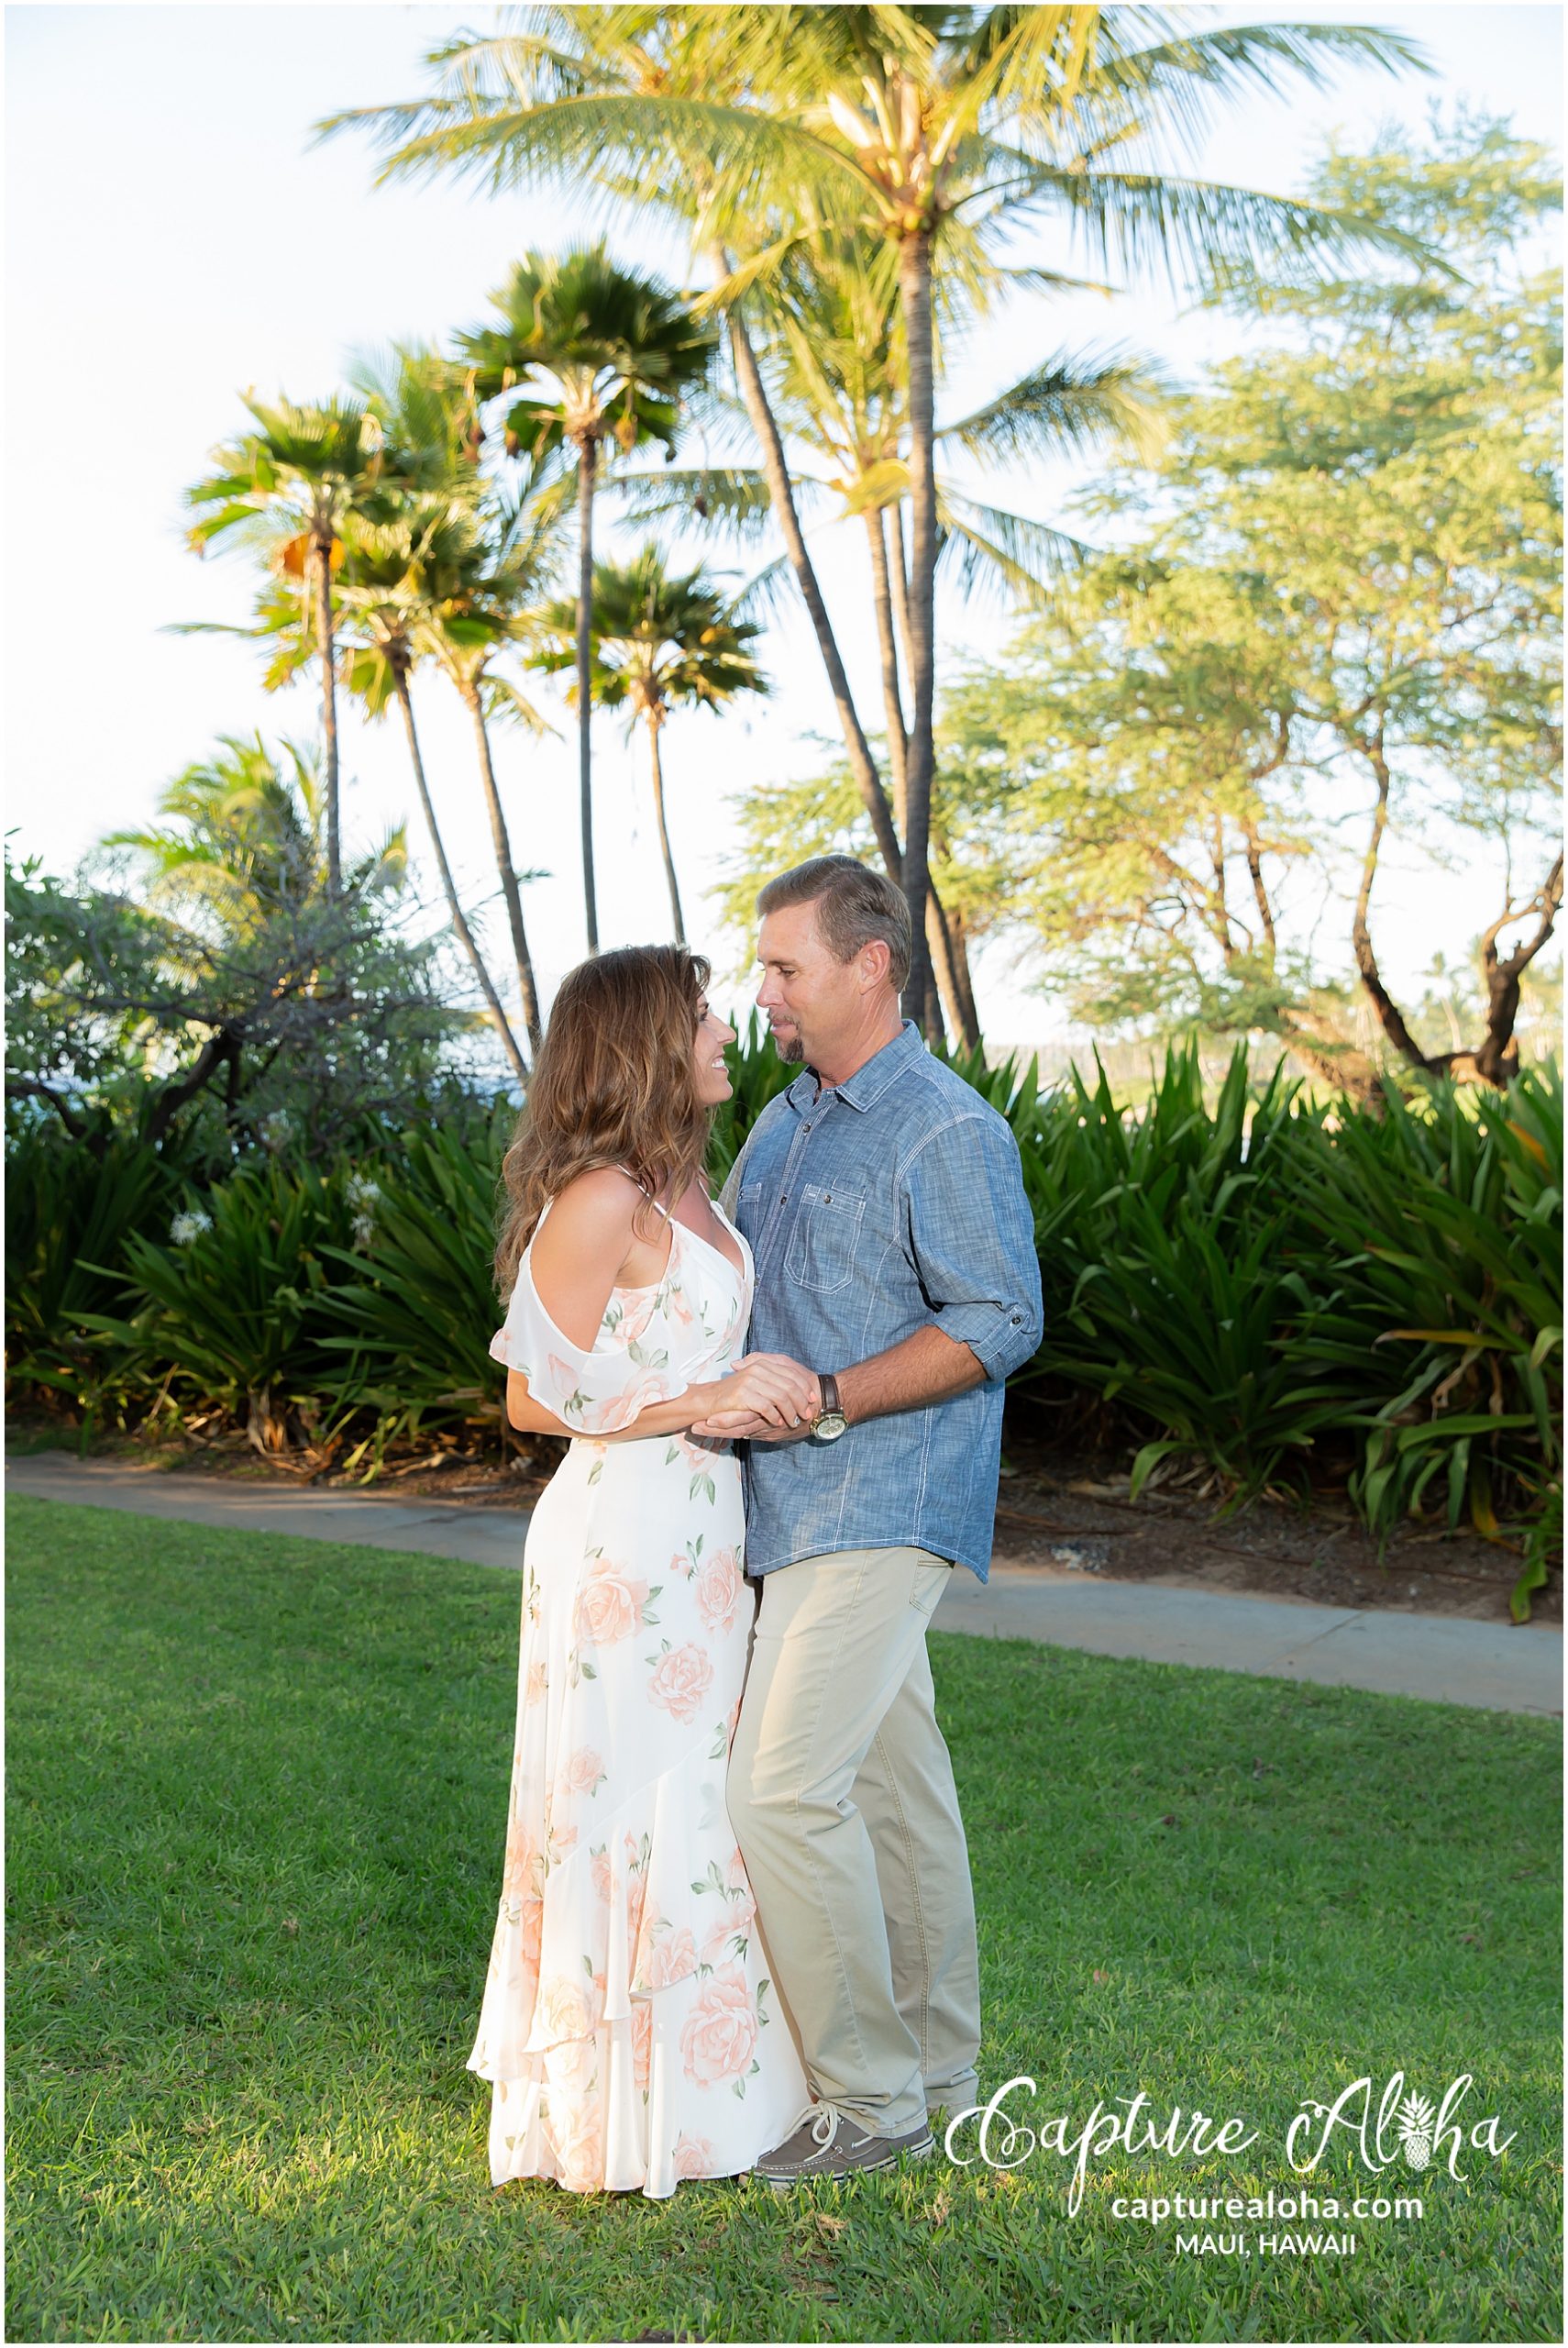 Maui Couples Photography at Mokapu Beach, Maui before sunset with palm trees in the background